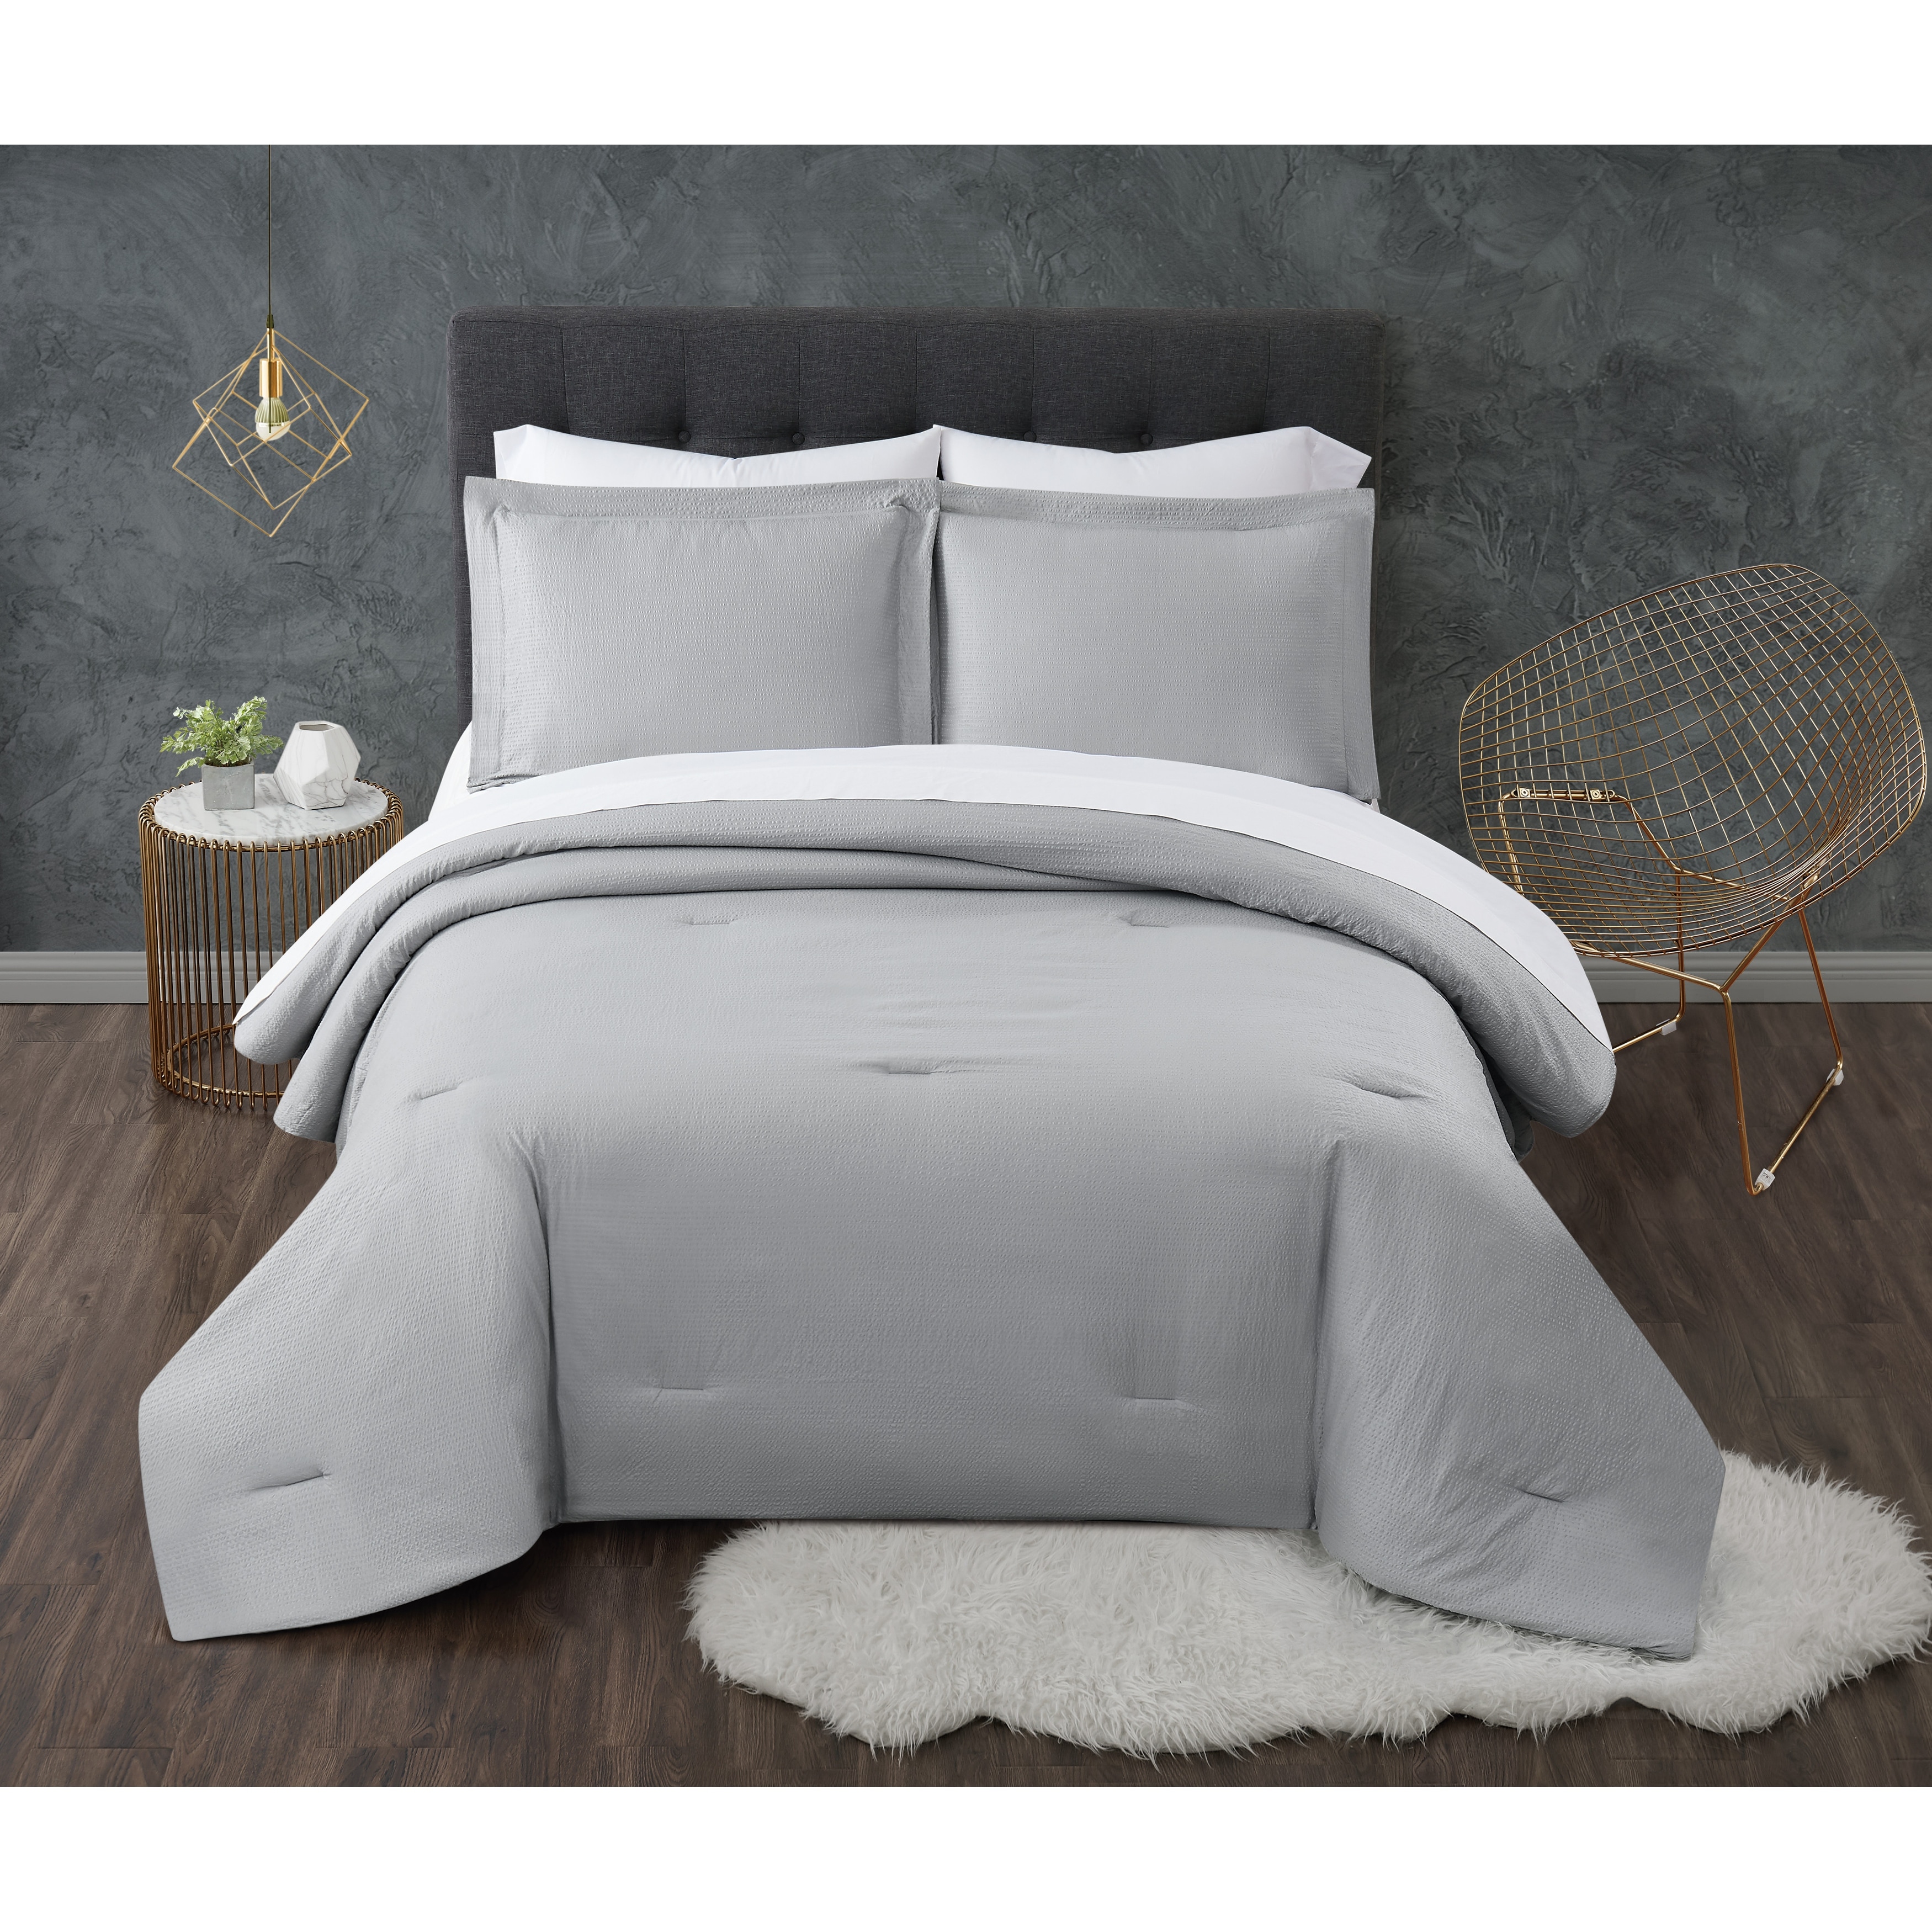 https://ak1.ostkcdn.com/images/products/is/images/direct/31848962c659a6c10274dc6b11106c8ae9f0bac7/Truly-Calm-Antimicrobial-Seersucker-Bed-in-a-Bag-Bed-in-a-Bag.jpg